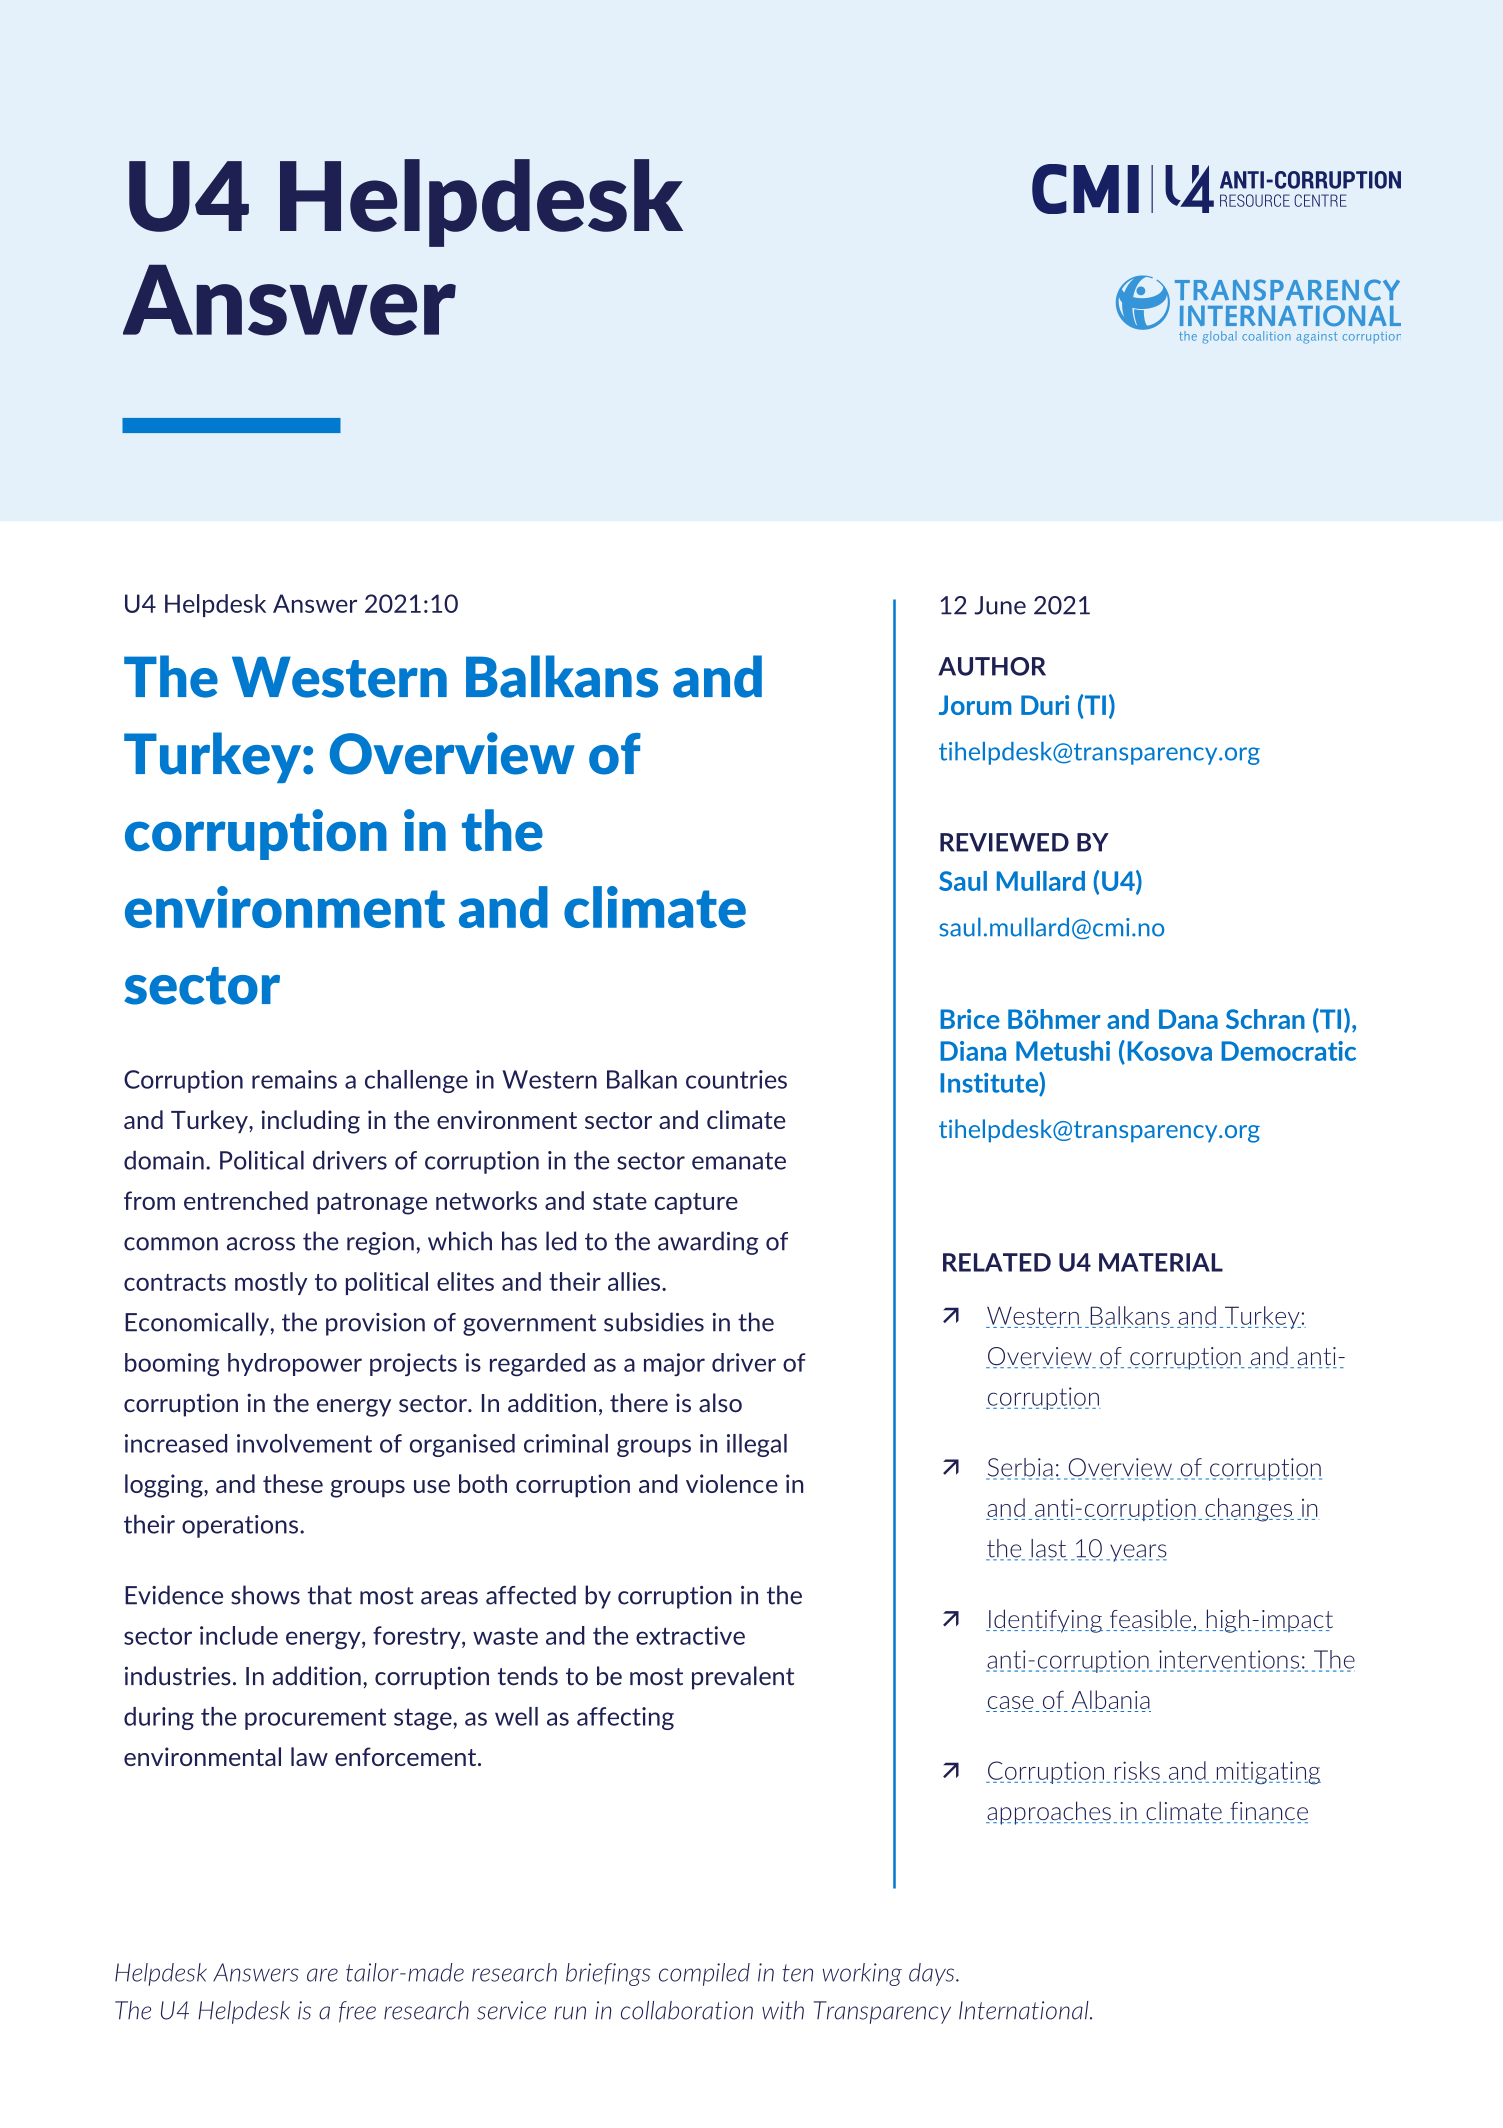 The Western Balkans and Turkey: Overview of corruption in the environment and climate sector